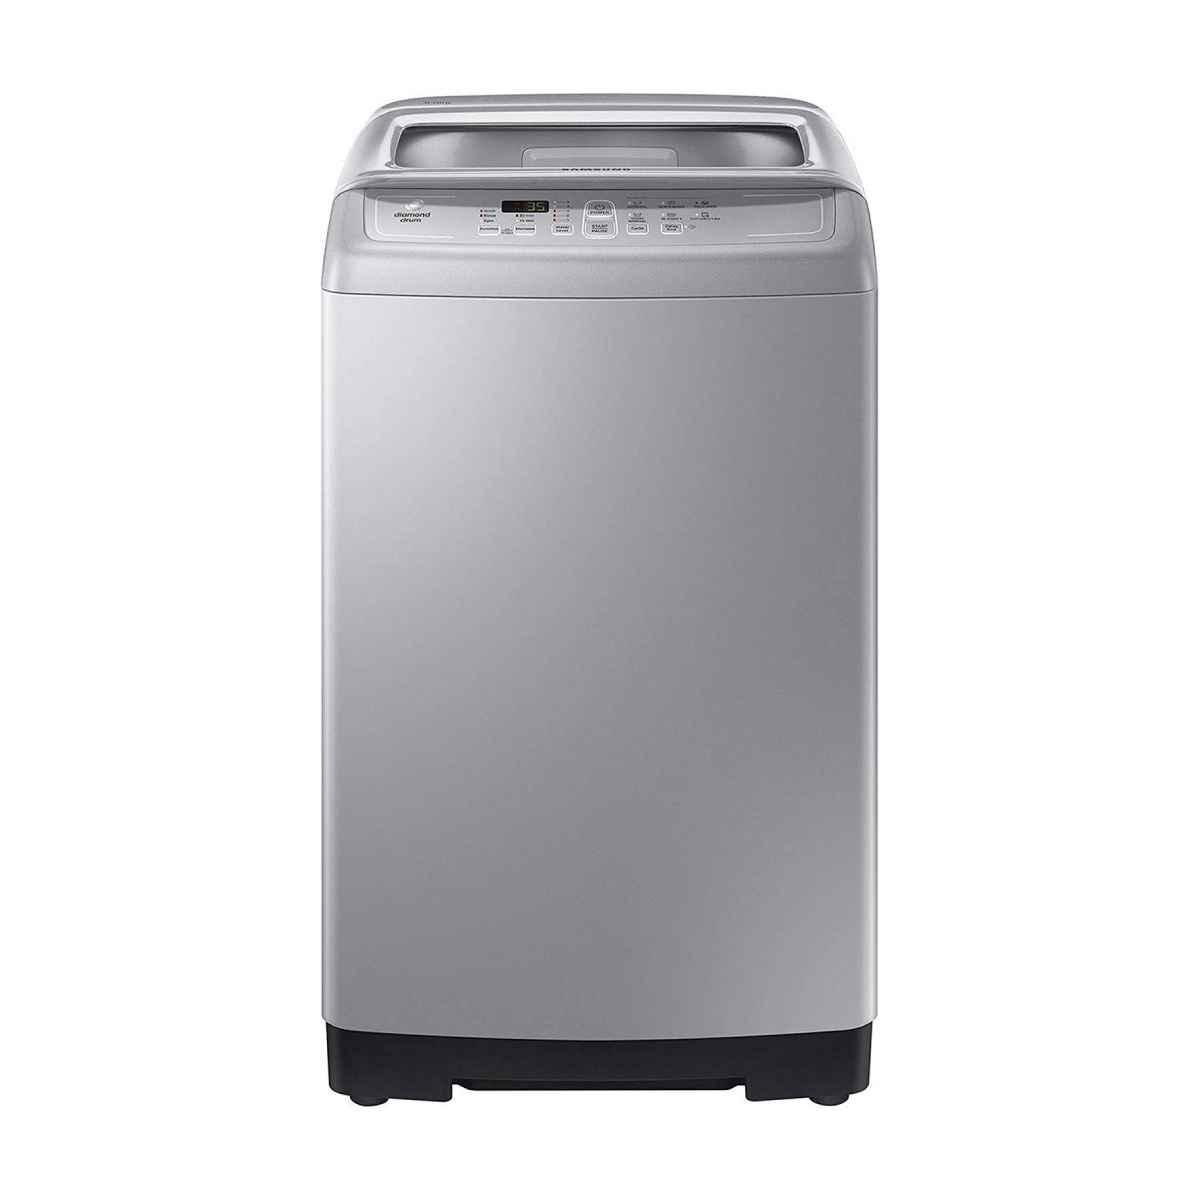 Samsung 6 Kg Fully Automatic Top Load Washing Machine (WA60M4100HY/TL, Imperial Silver)